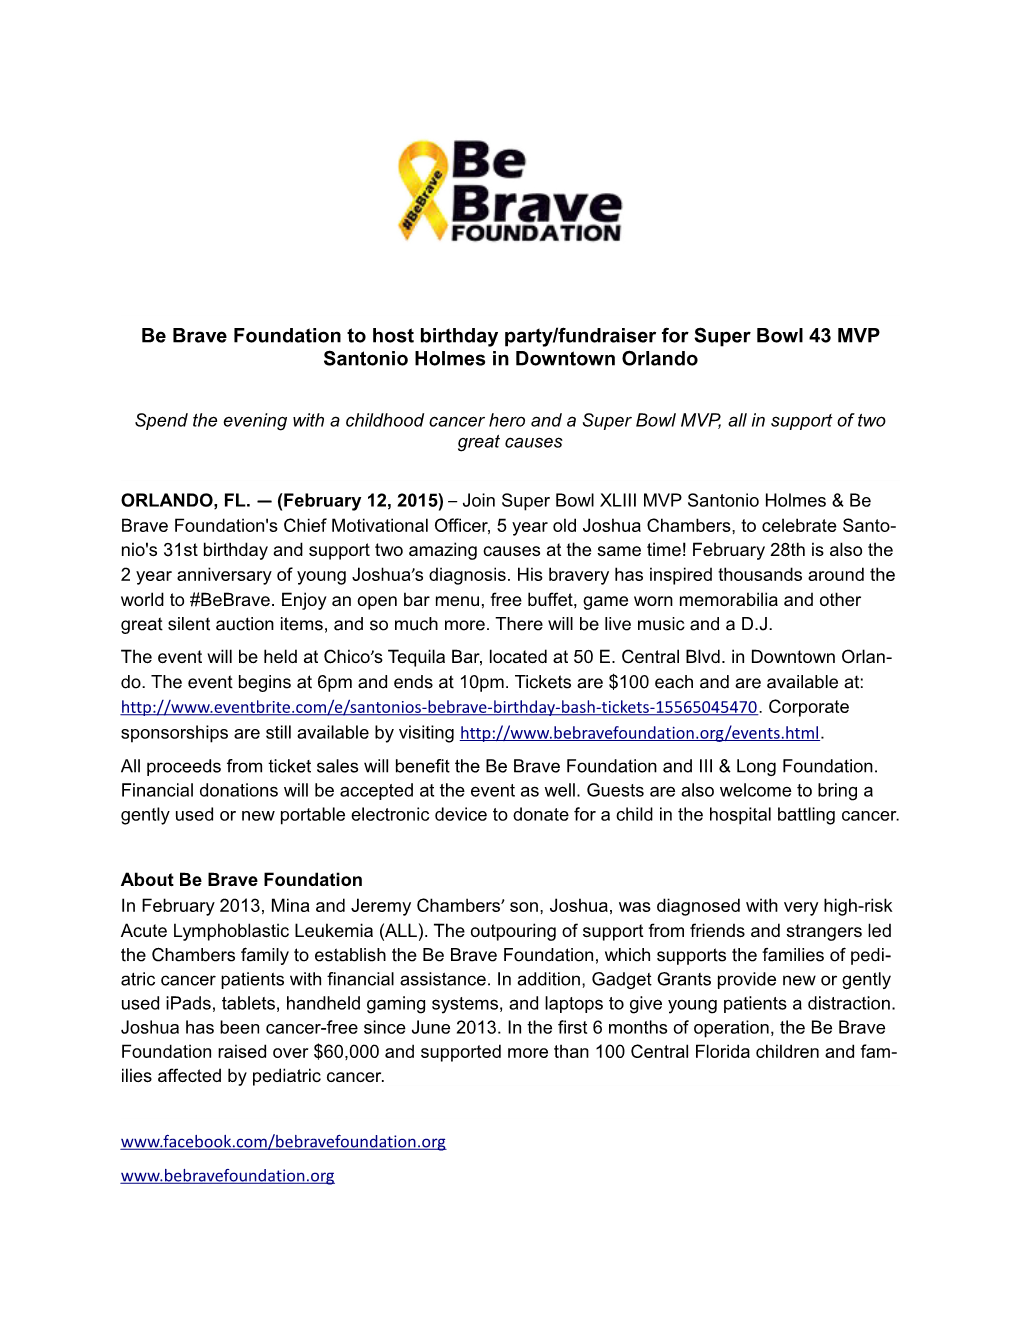 Be Brave Foundation to Host Birthday Party/Fundraiser for Super Bowl 43 MVP Santonio Holmes